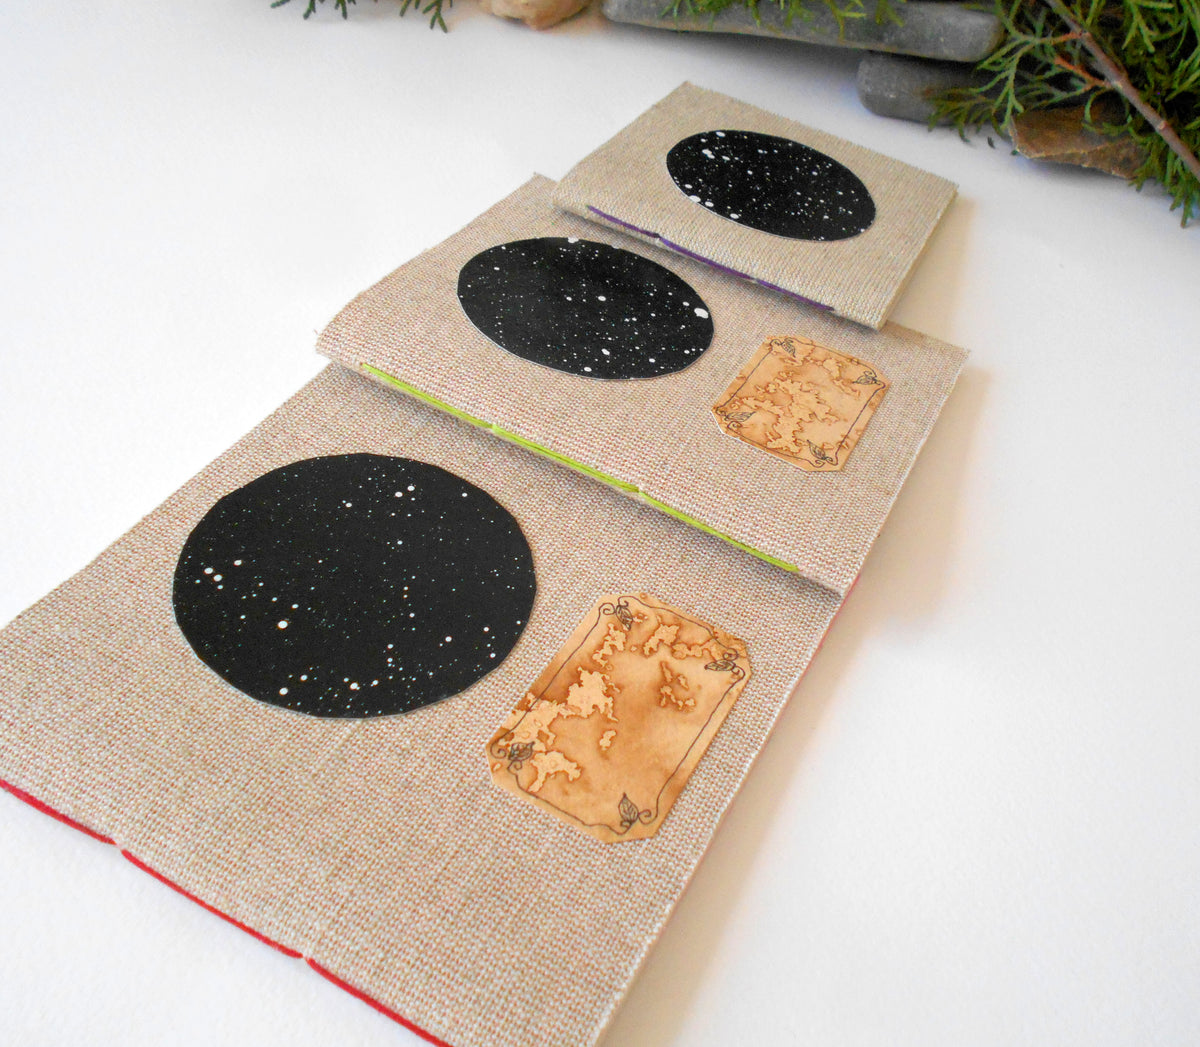 Star Sky Art notebooks set of 3- Hemp cord binding- 100% recycled pages